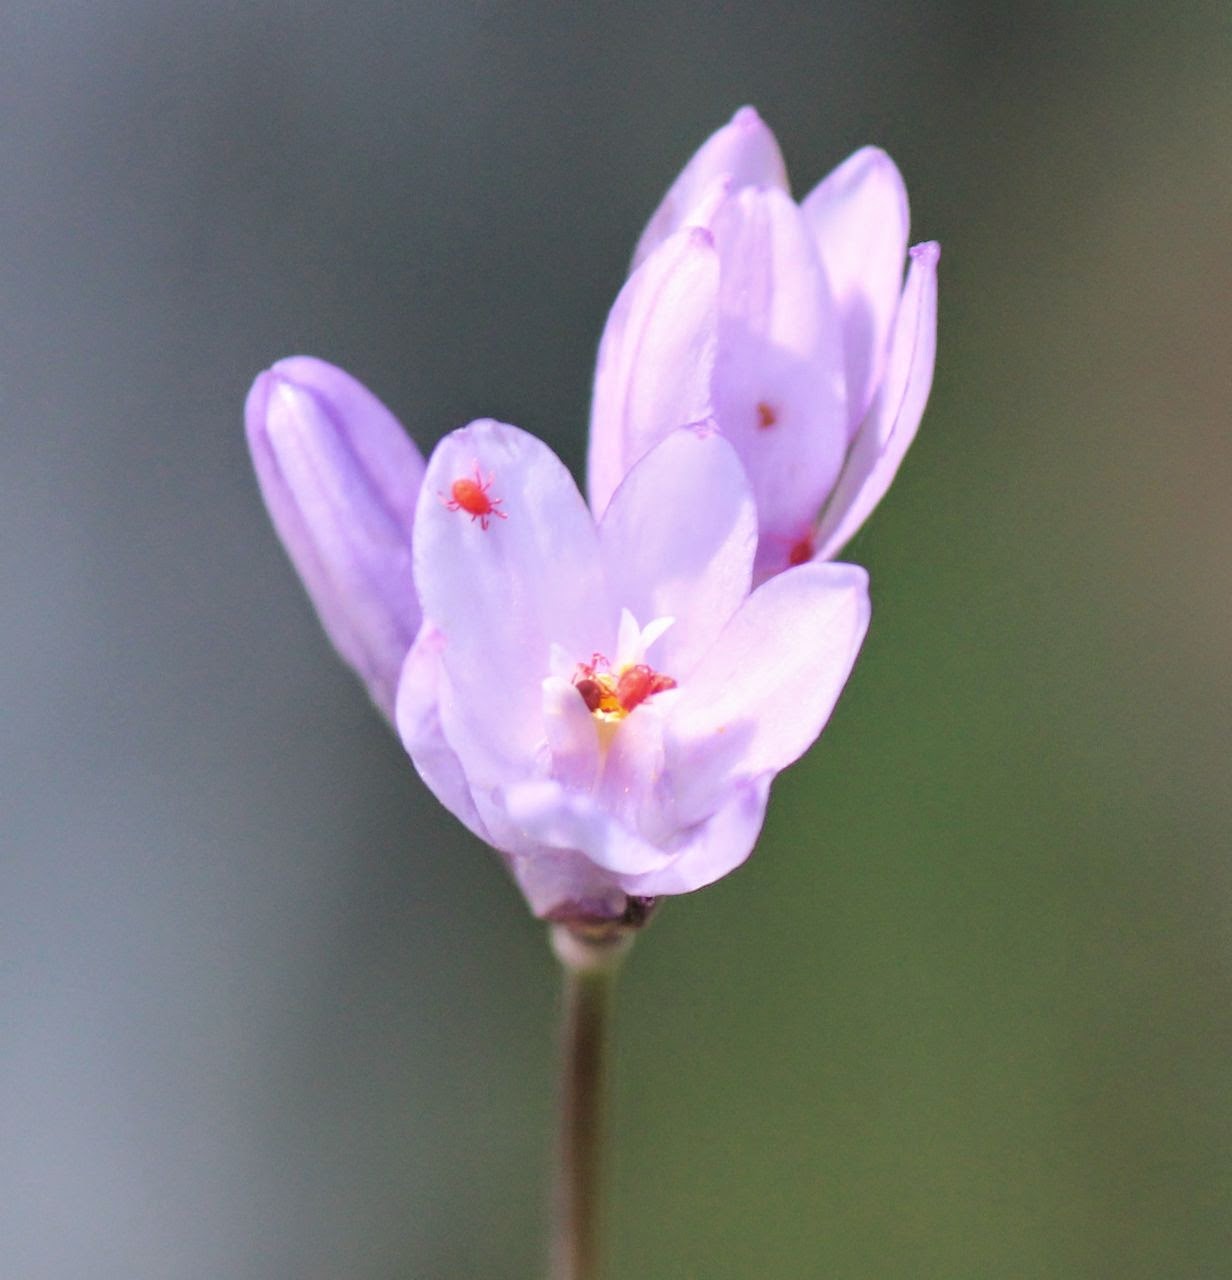 A closer look at wild hyacinth reveals tiny surprises